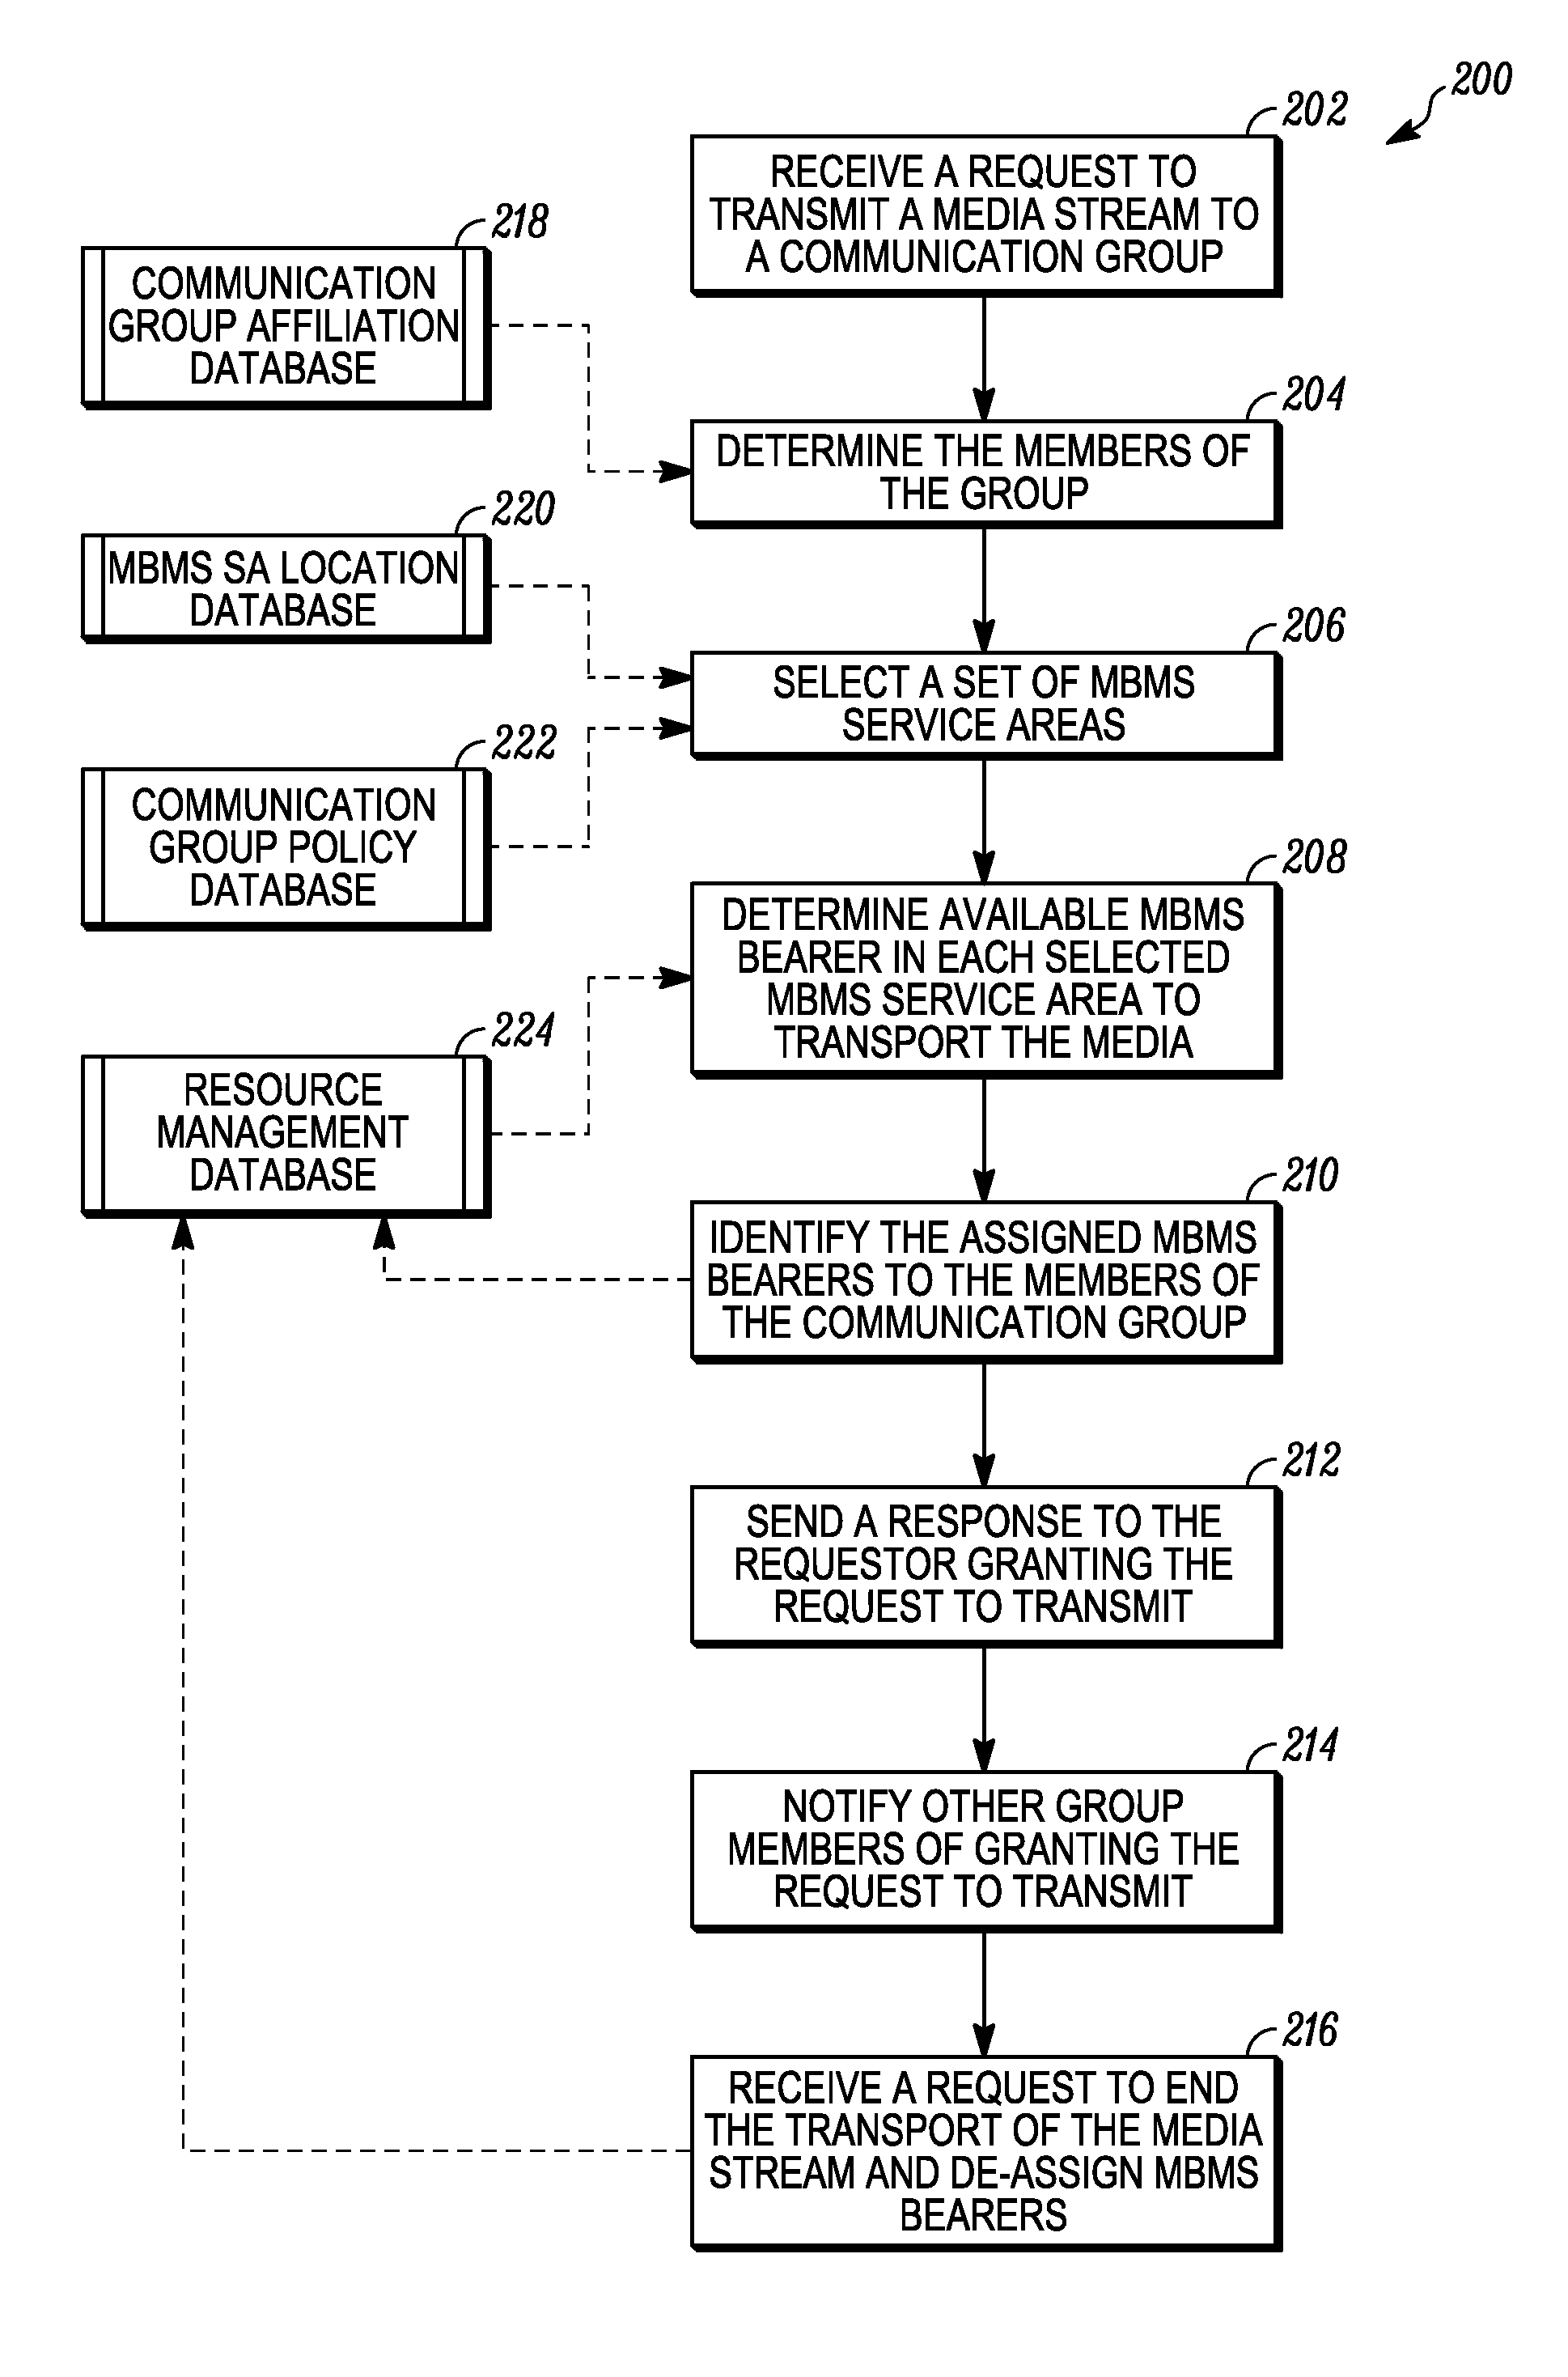 Methods for assigning a plethora of group communications among a limited number of pre-established MBMS bearers in a communication system